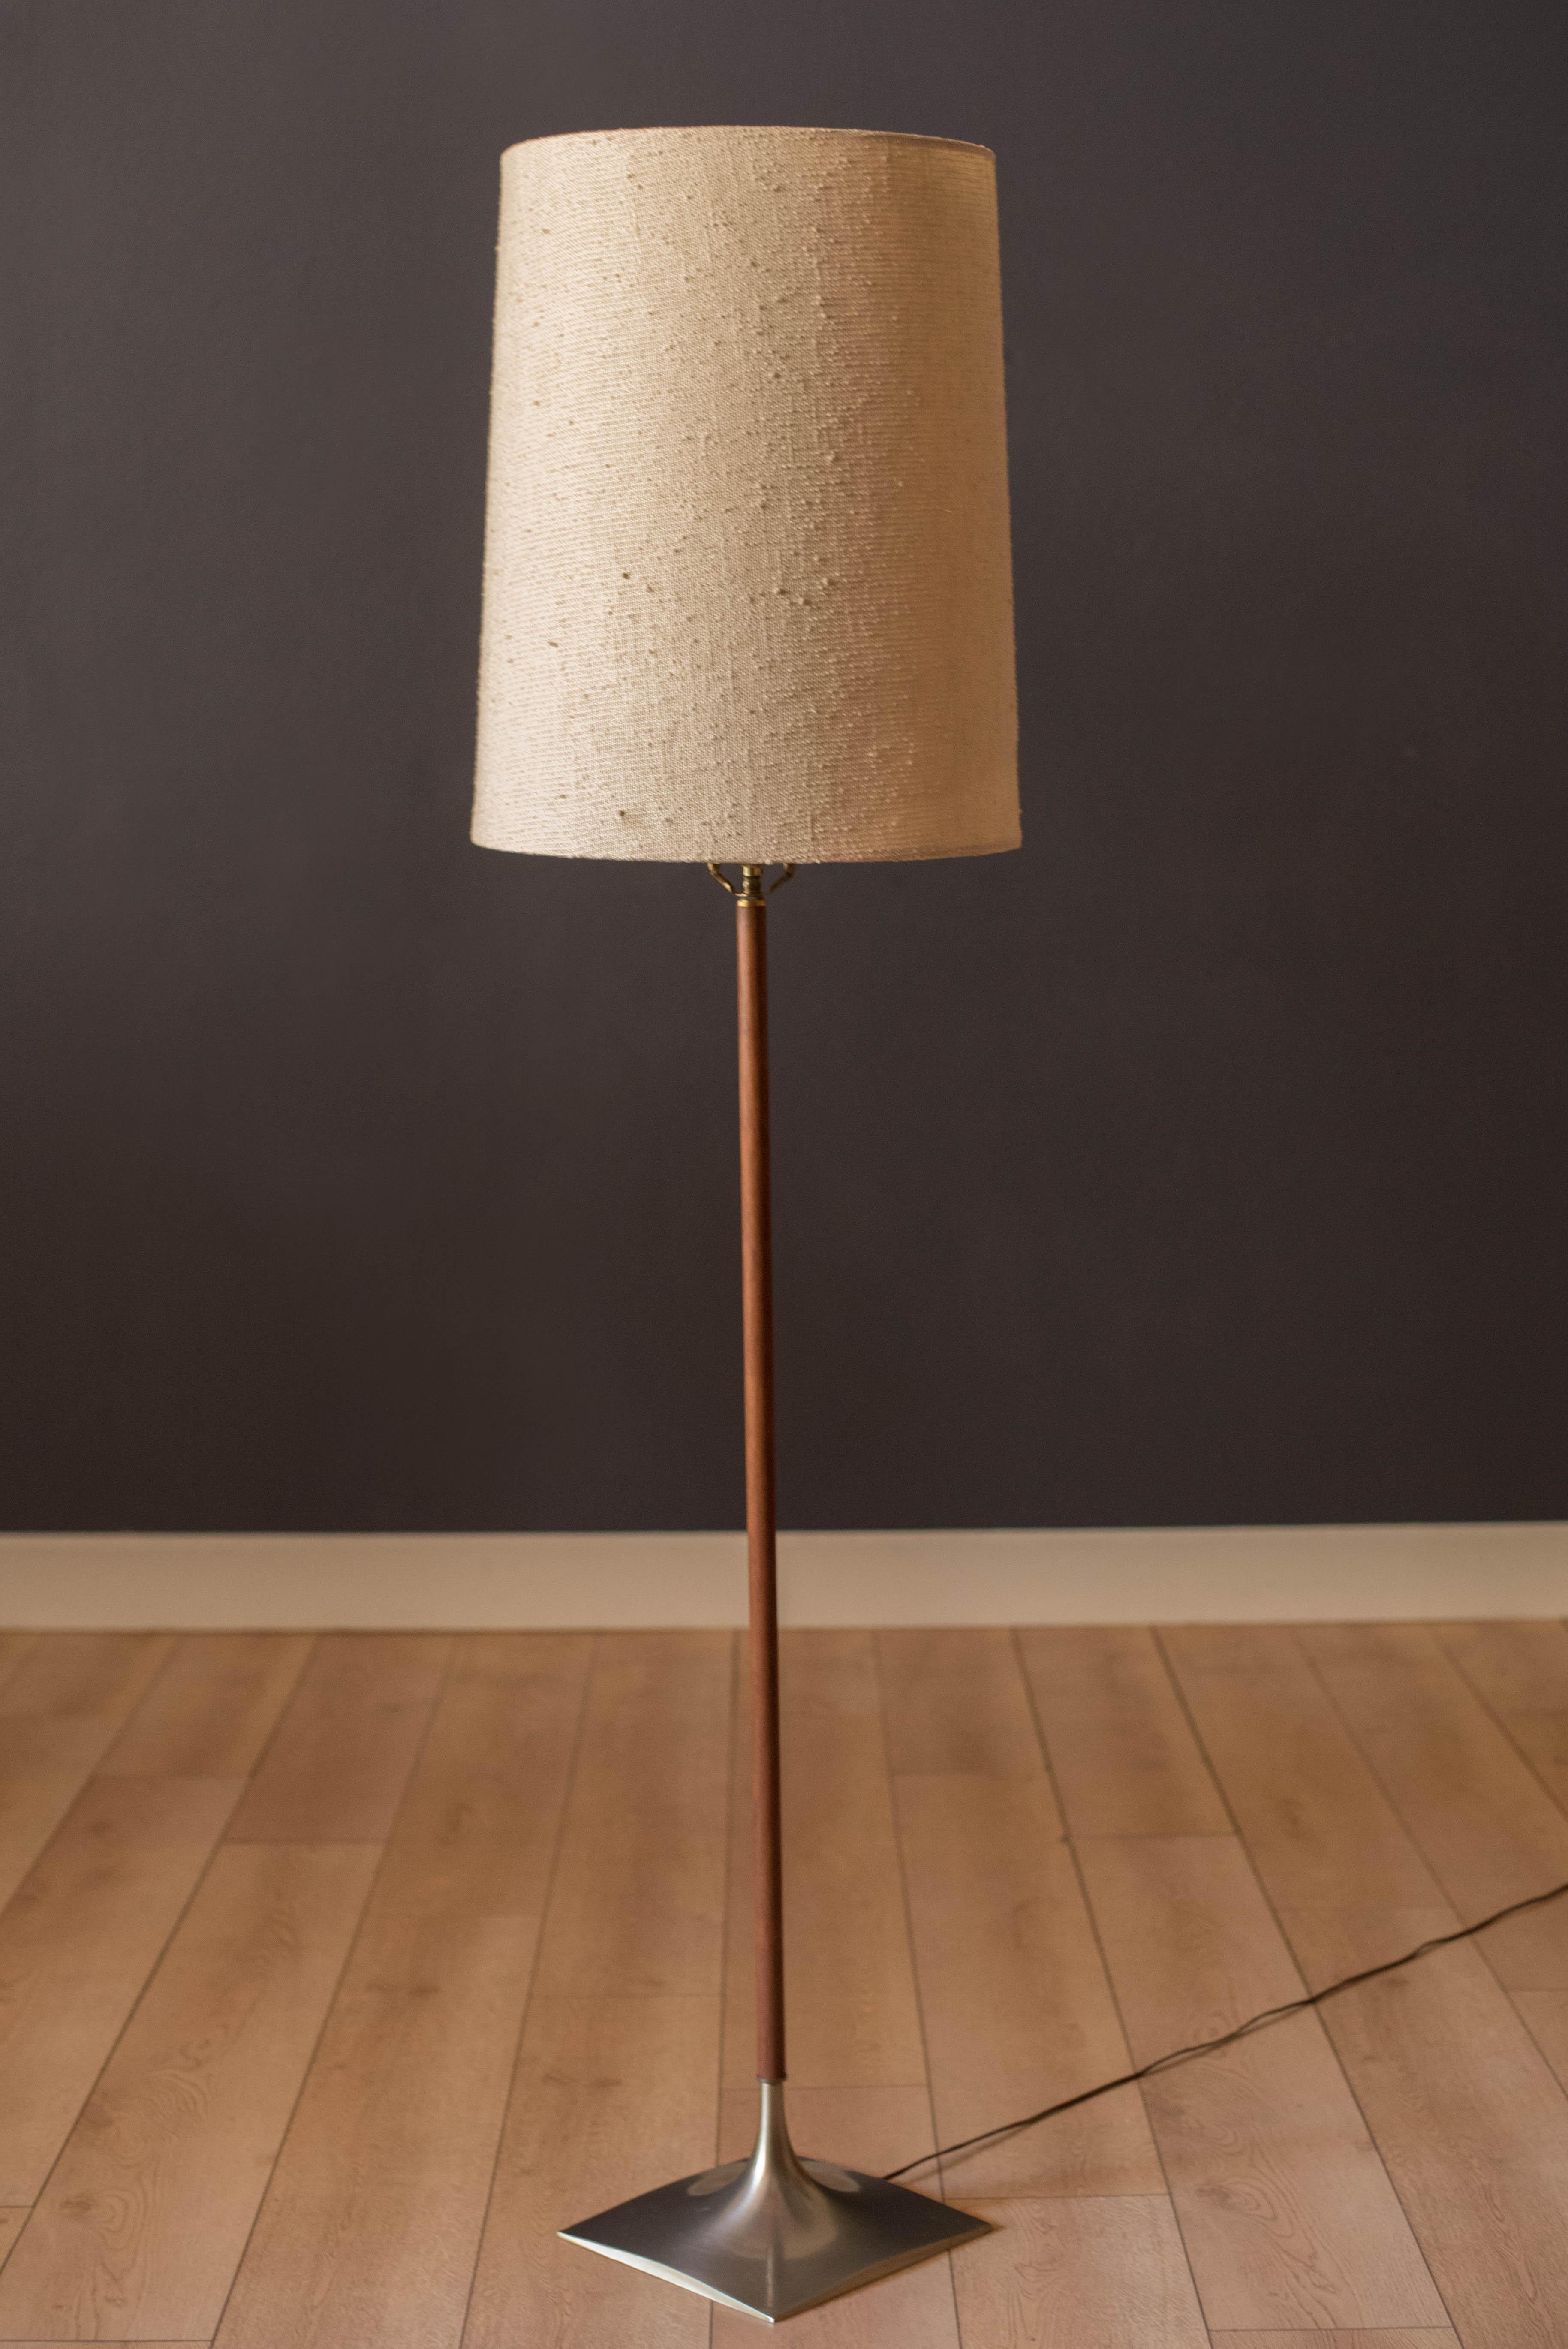 Vintage floor lamp manufactured by Laurel Lamp Co. circa 1960's. Features a walnut stem and a sculptural weighted chrome base. Functions with a three-way switch. Shade is not included. 